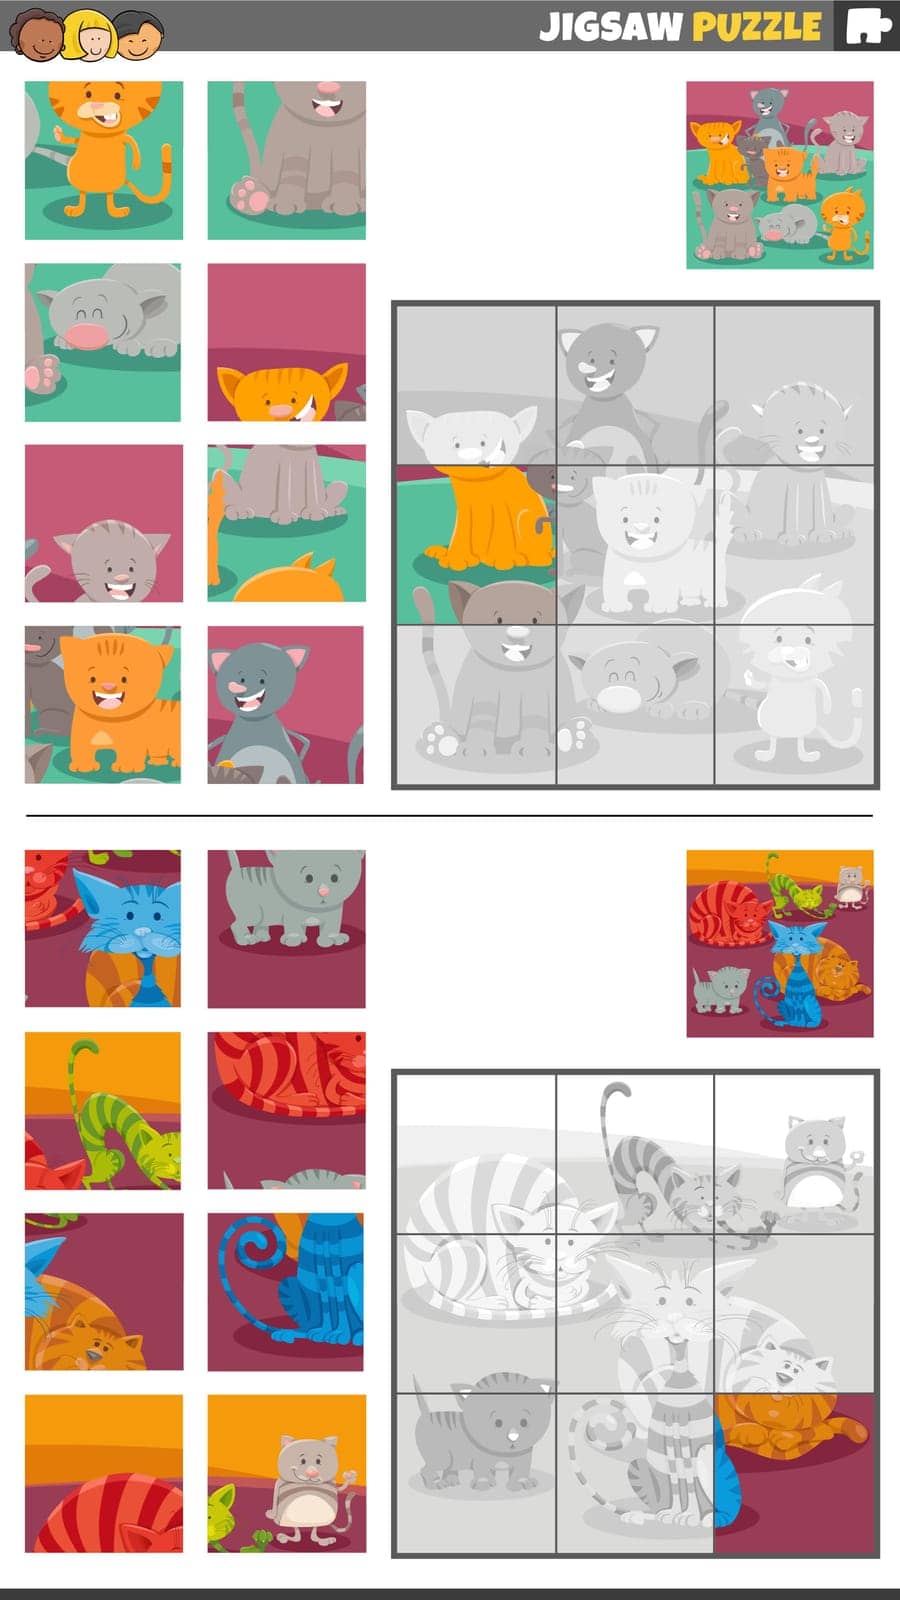 Cartoon illustration of educational jigsaw puzzle games set with wild cats animal characters